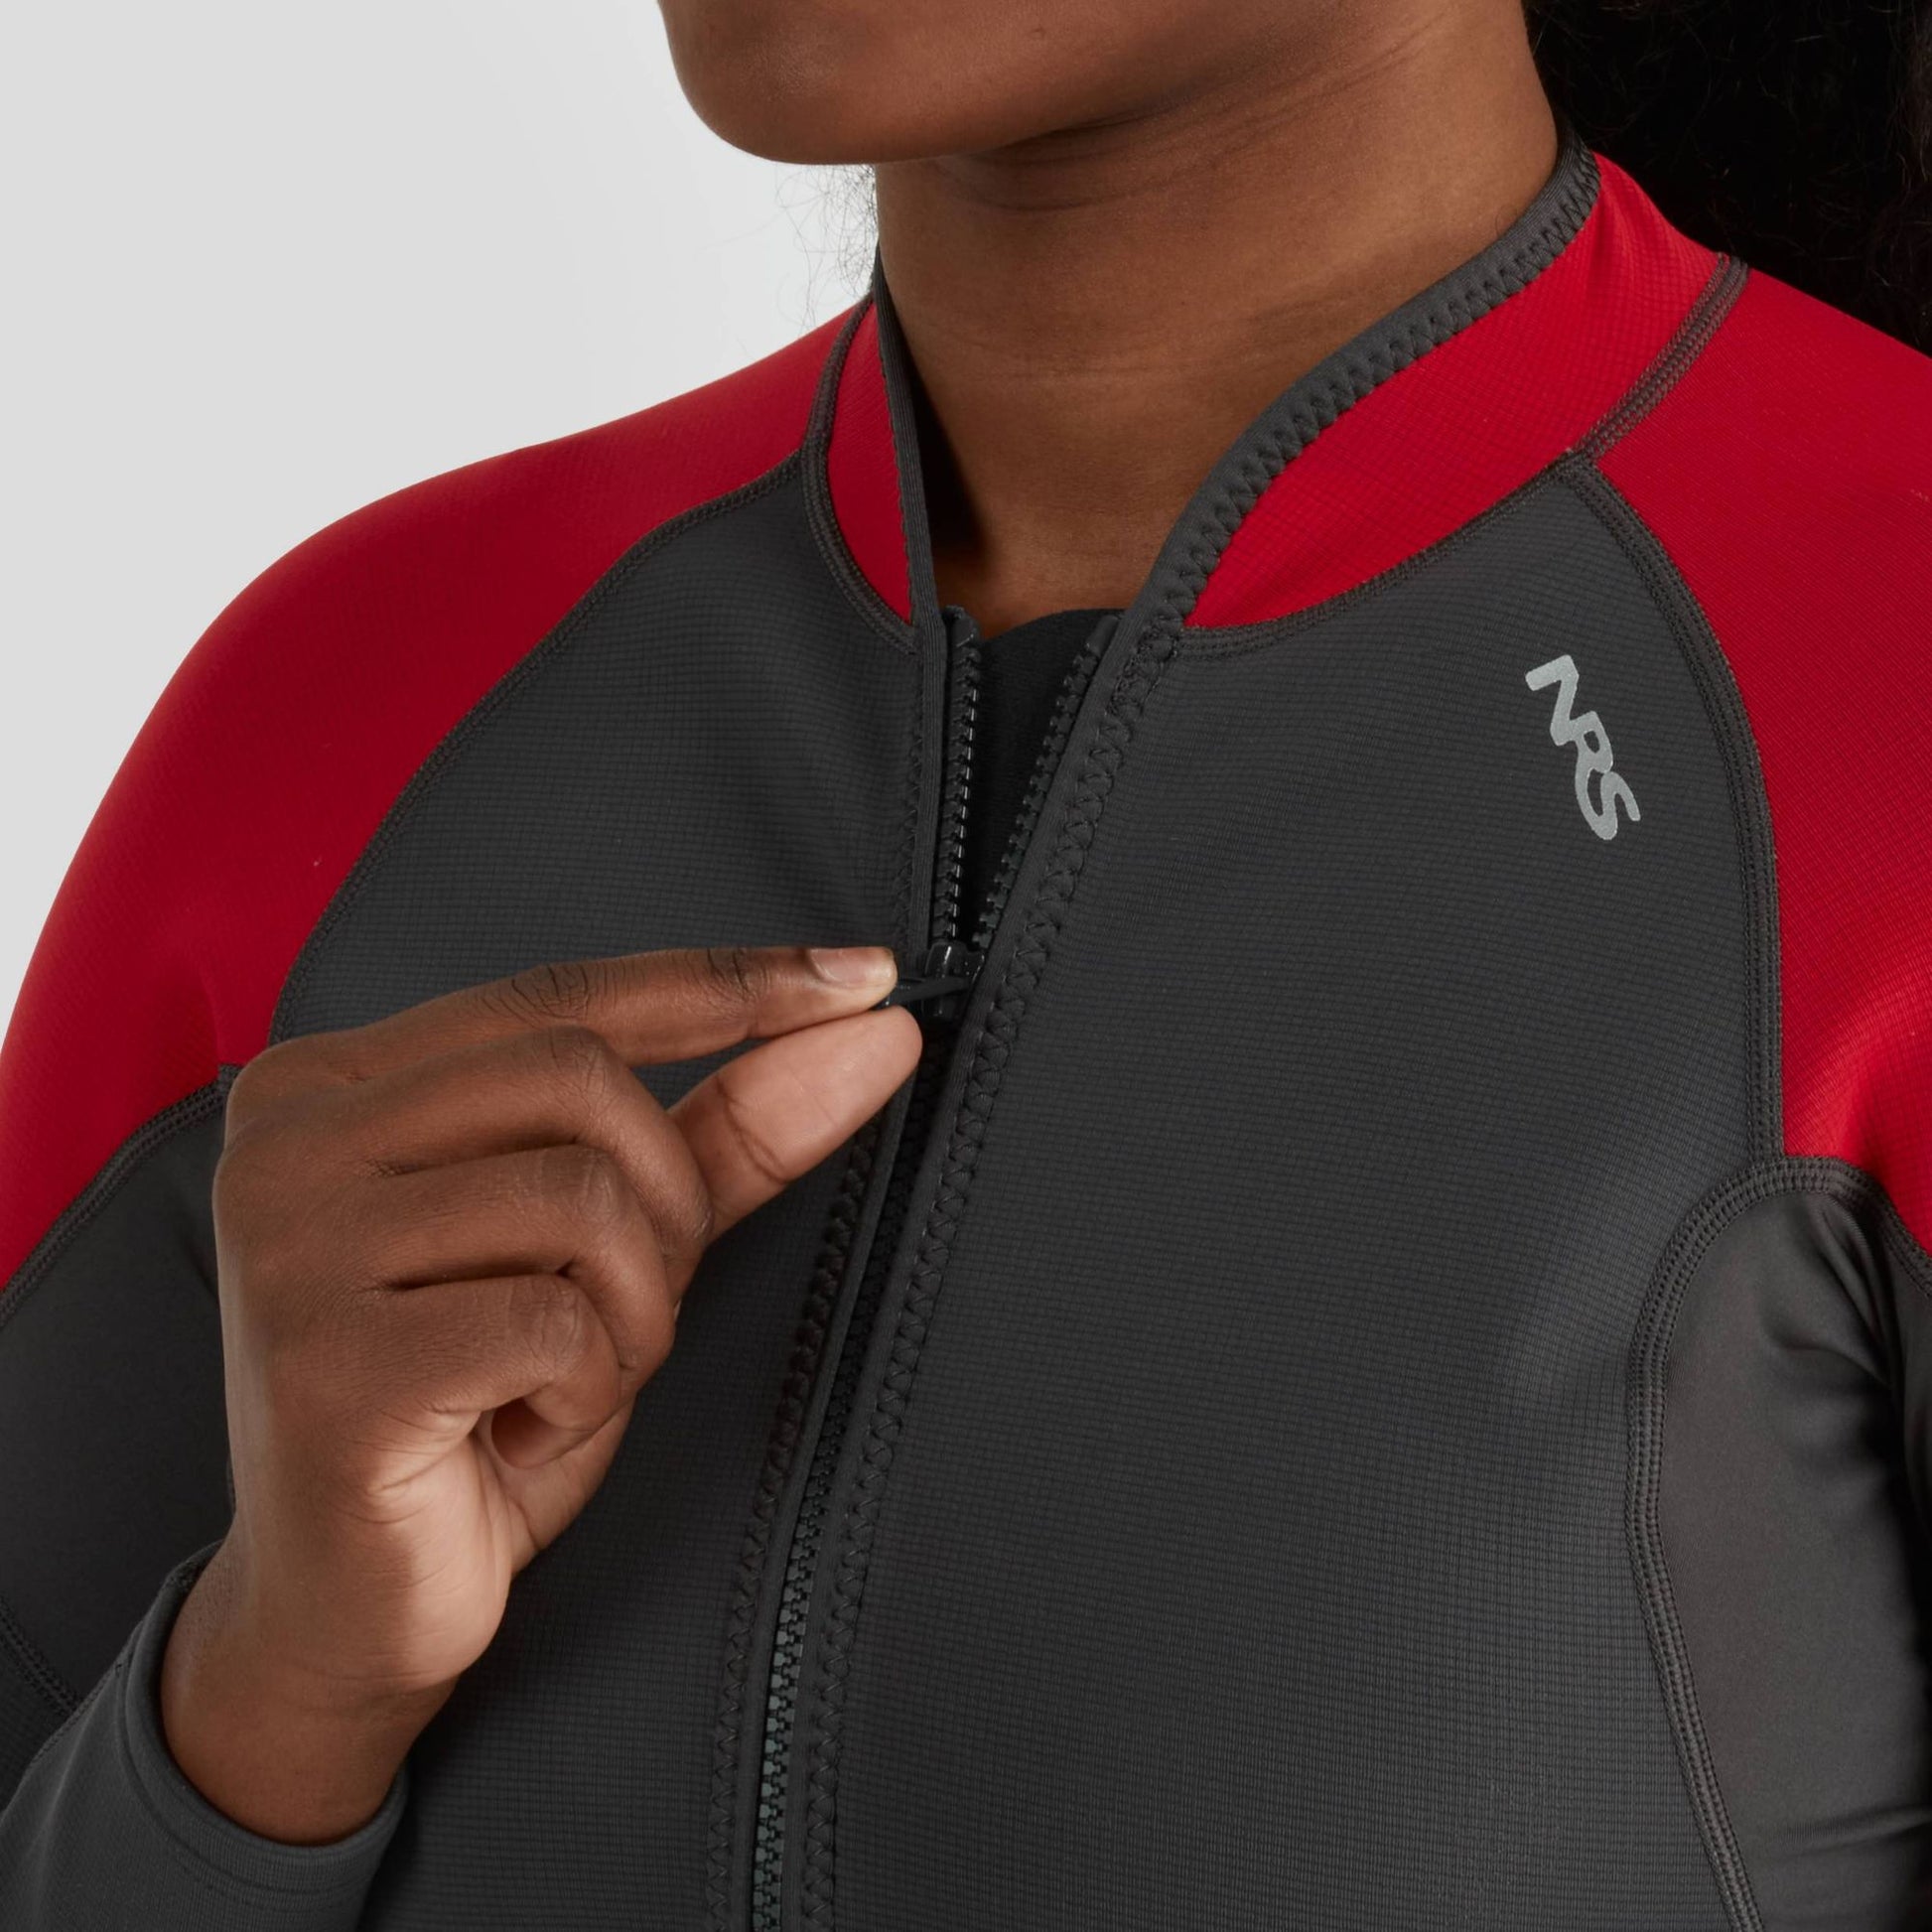 A woman sporting a black and red NRS Hydroskin 0.5 Jacket - Women's, a valuable addition to her layering arsenal for combating water retention.